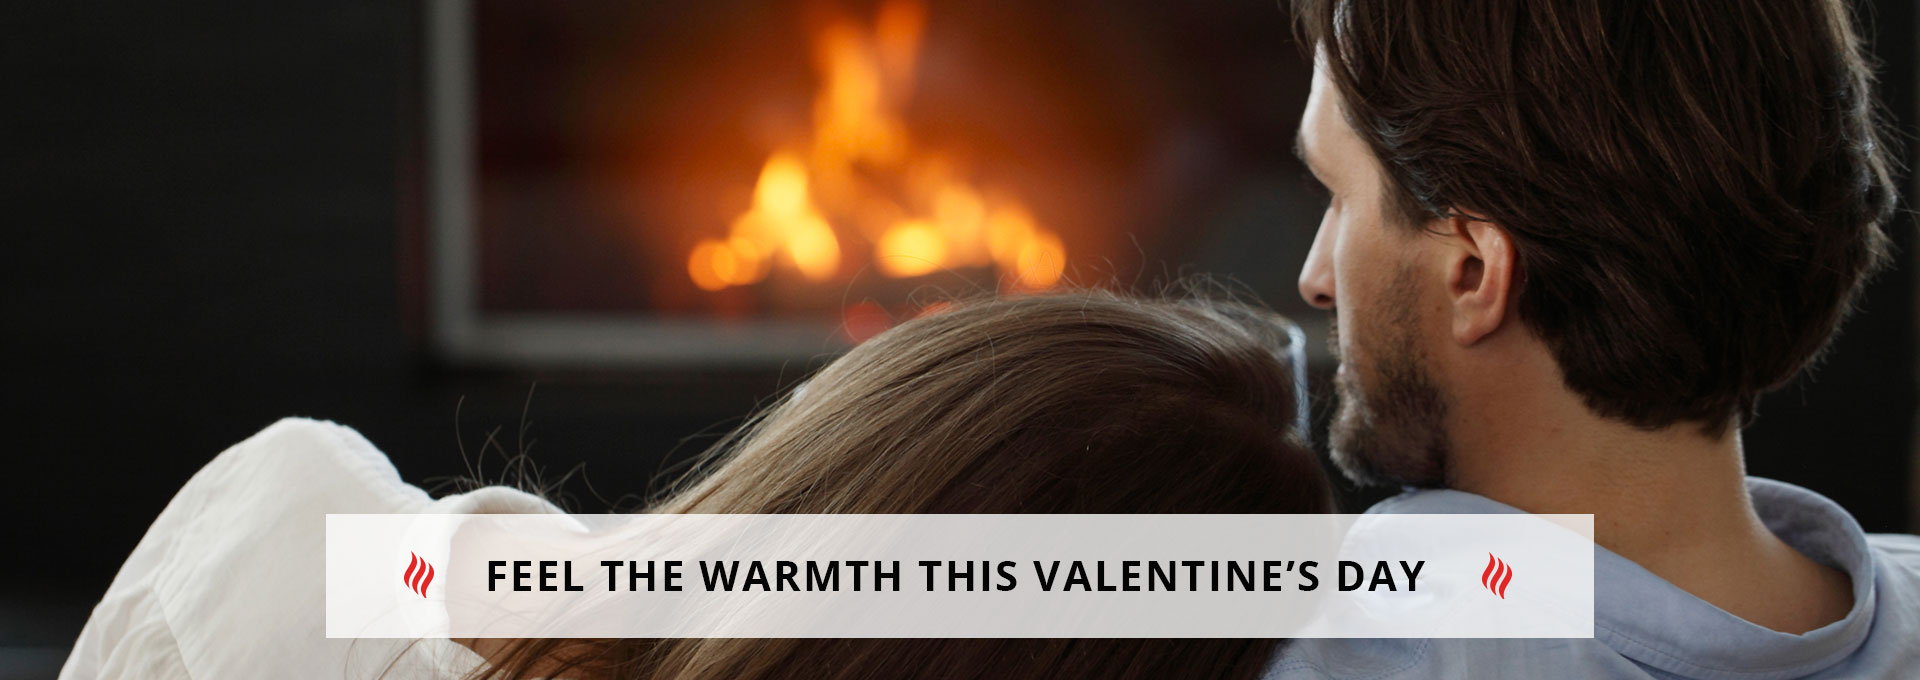 Feel the Warmth this Valentine’s Day 